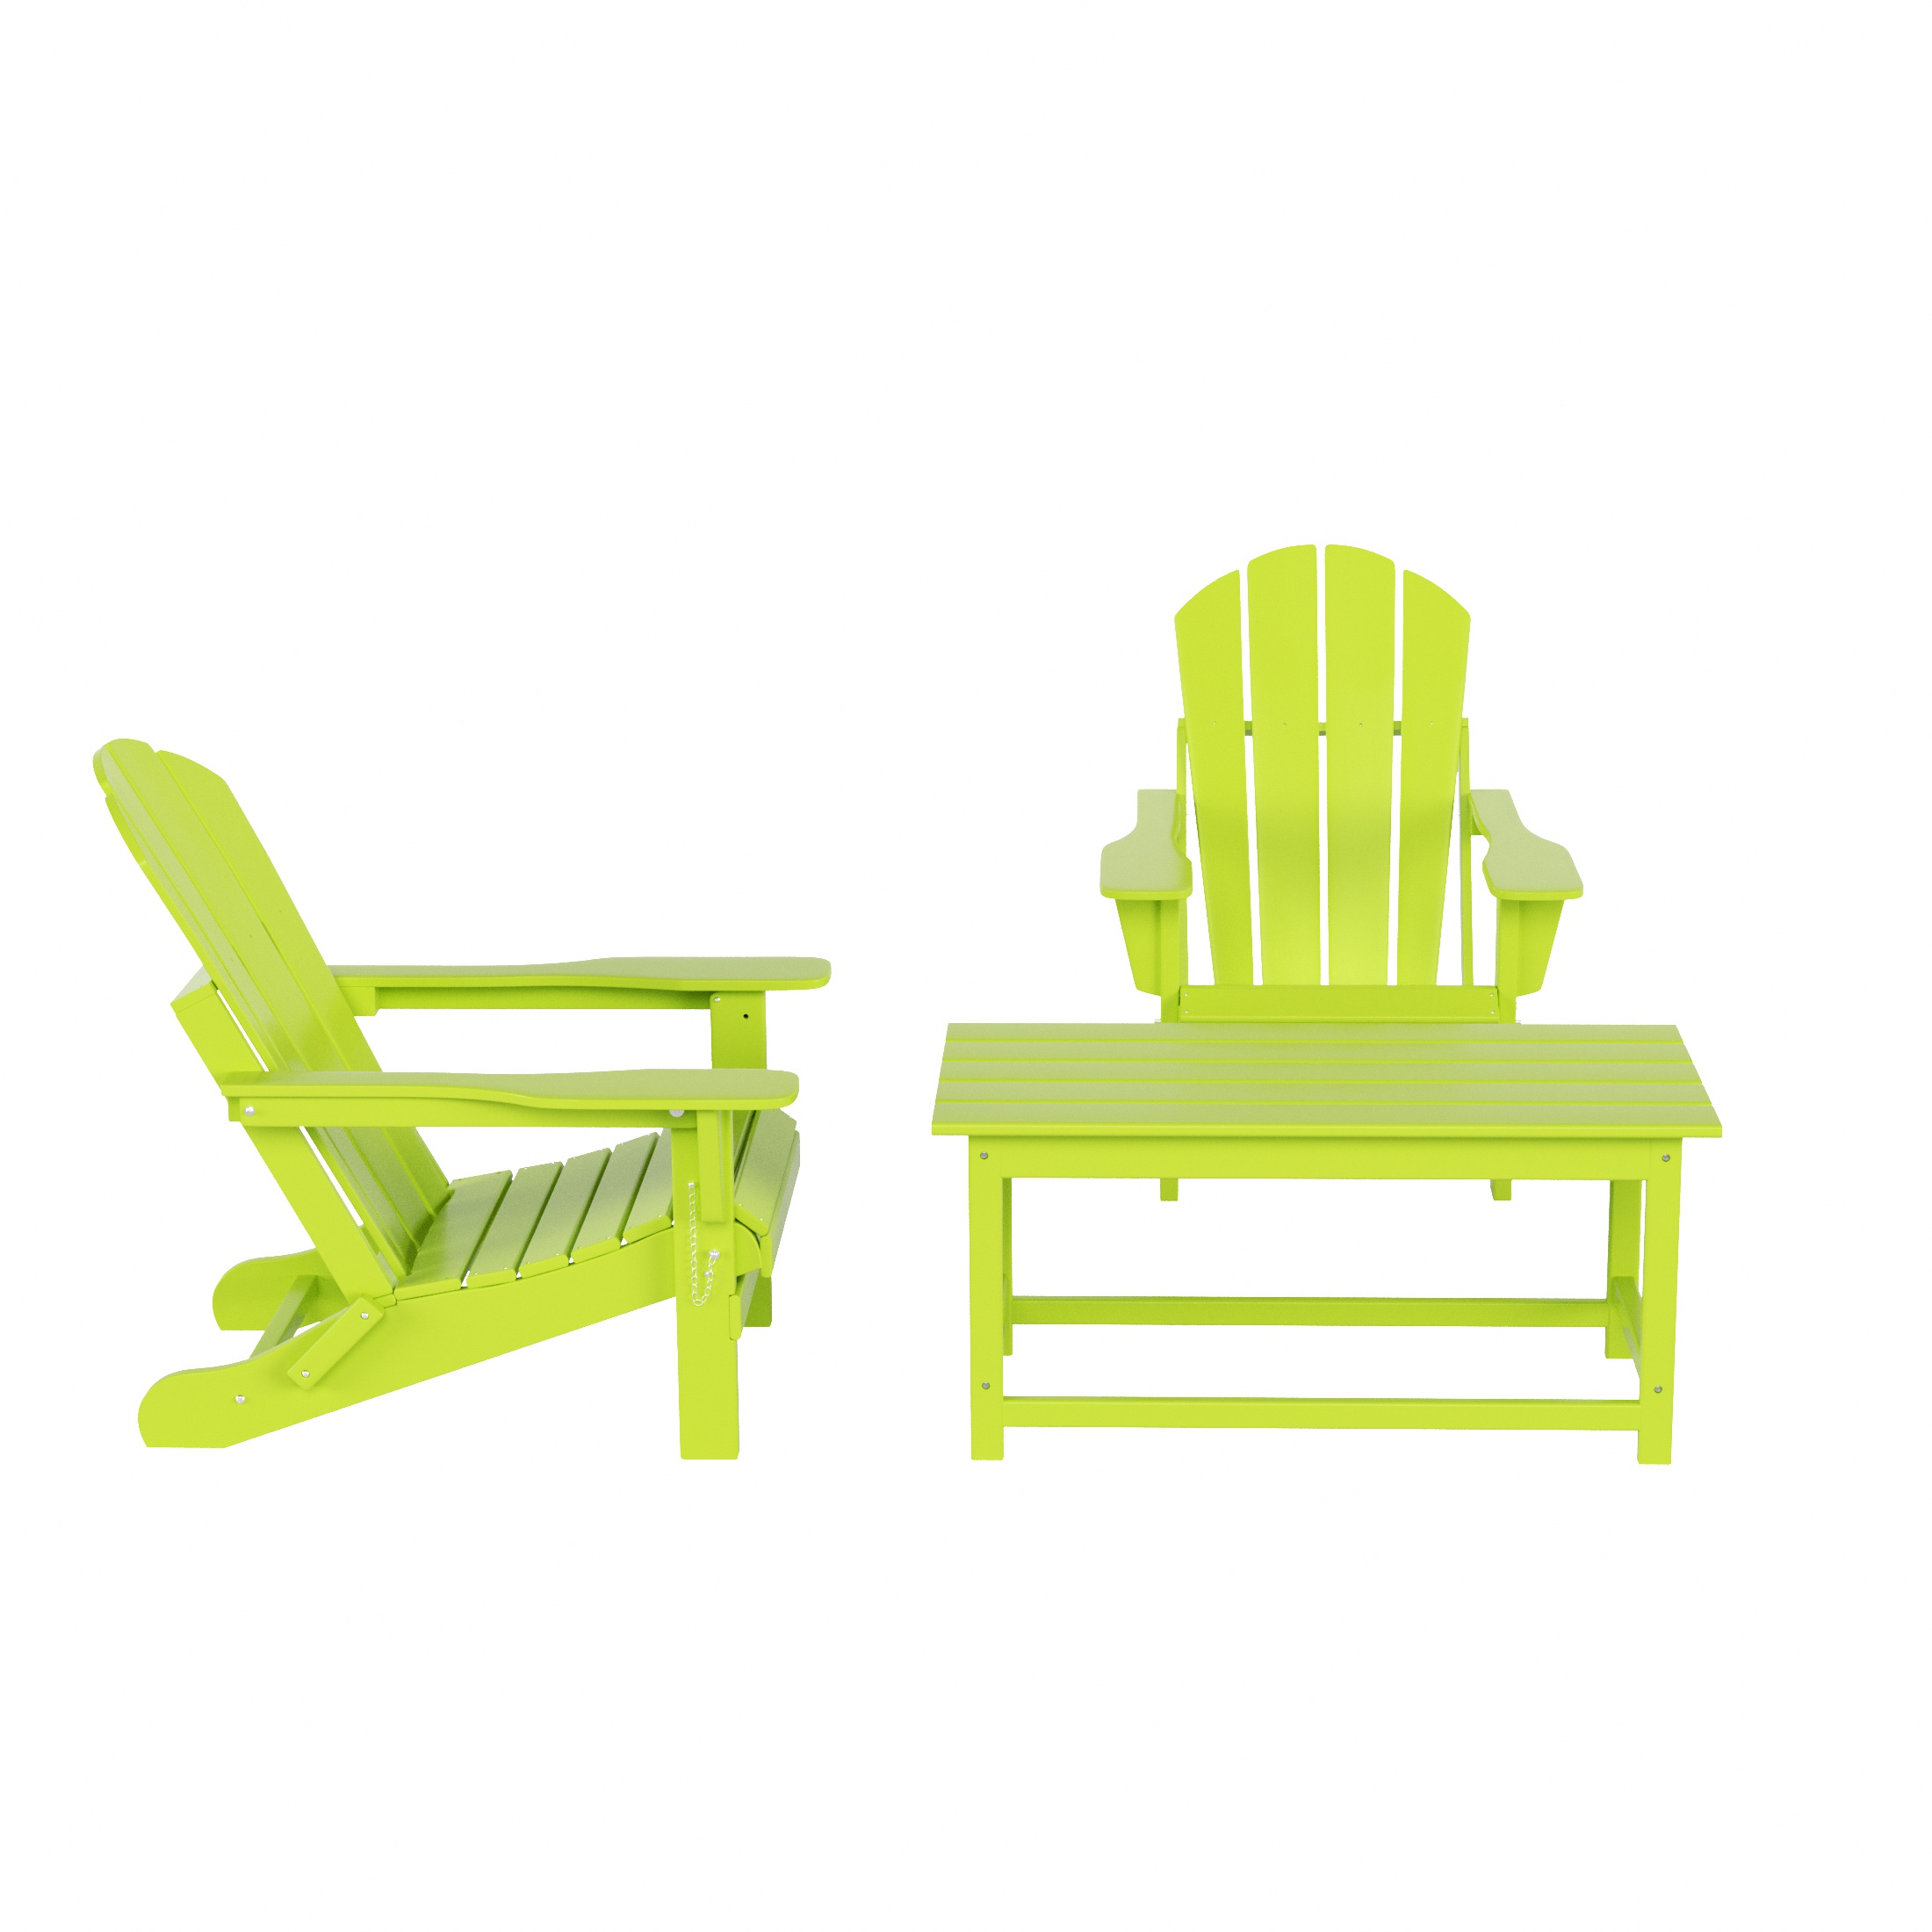 WestinTrends Malibu 3-Pieces Outdoor Patio Furniture Set, All Weather Outdoor Seating Plastic Adirondack Chair Set of 2 with Coffee Table for Porch Lawn Backyard, Lime - image 3 of 7